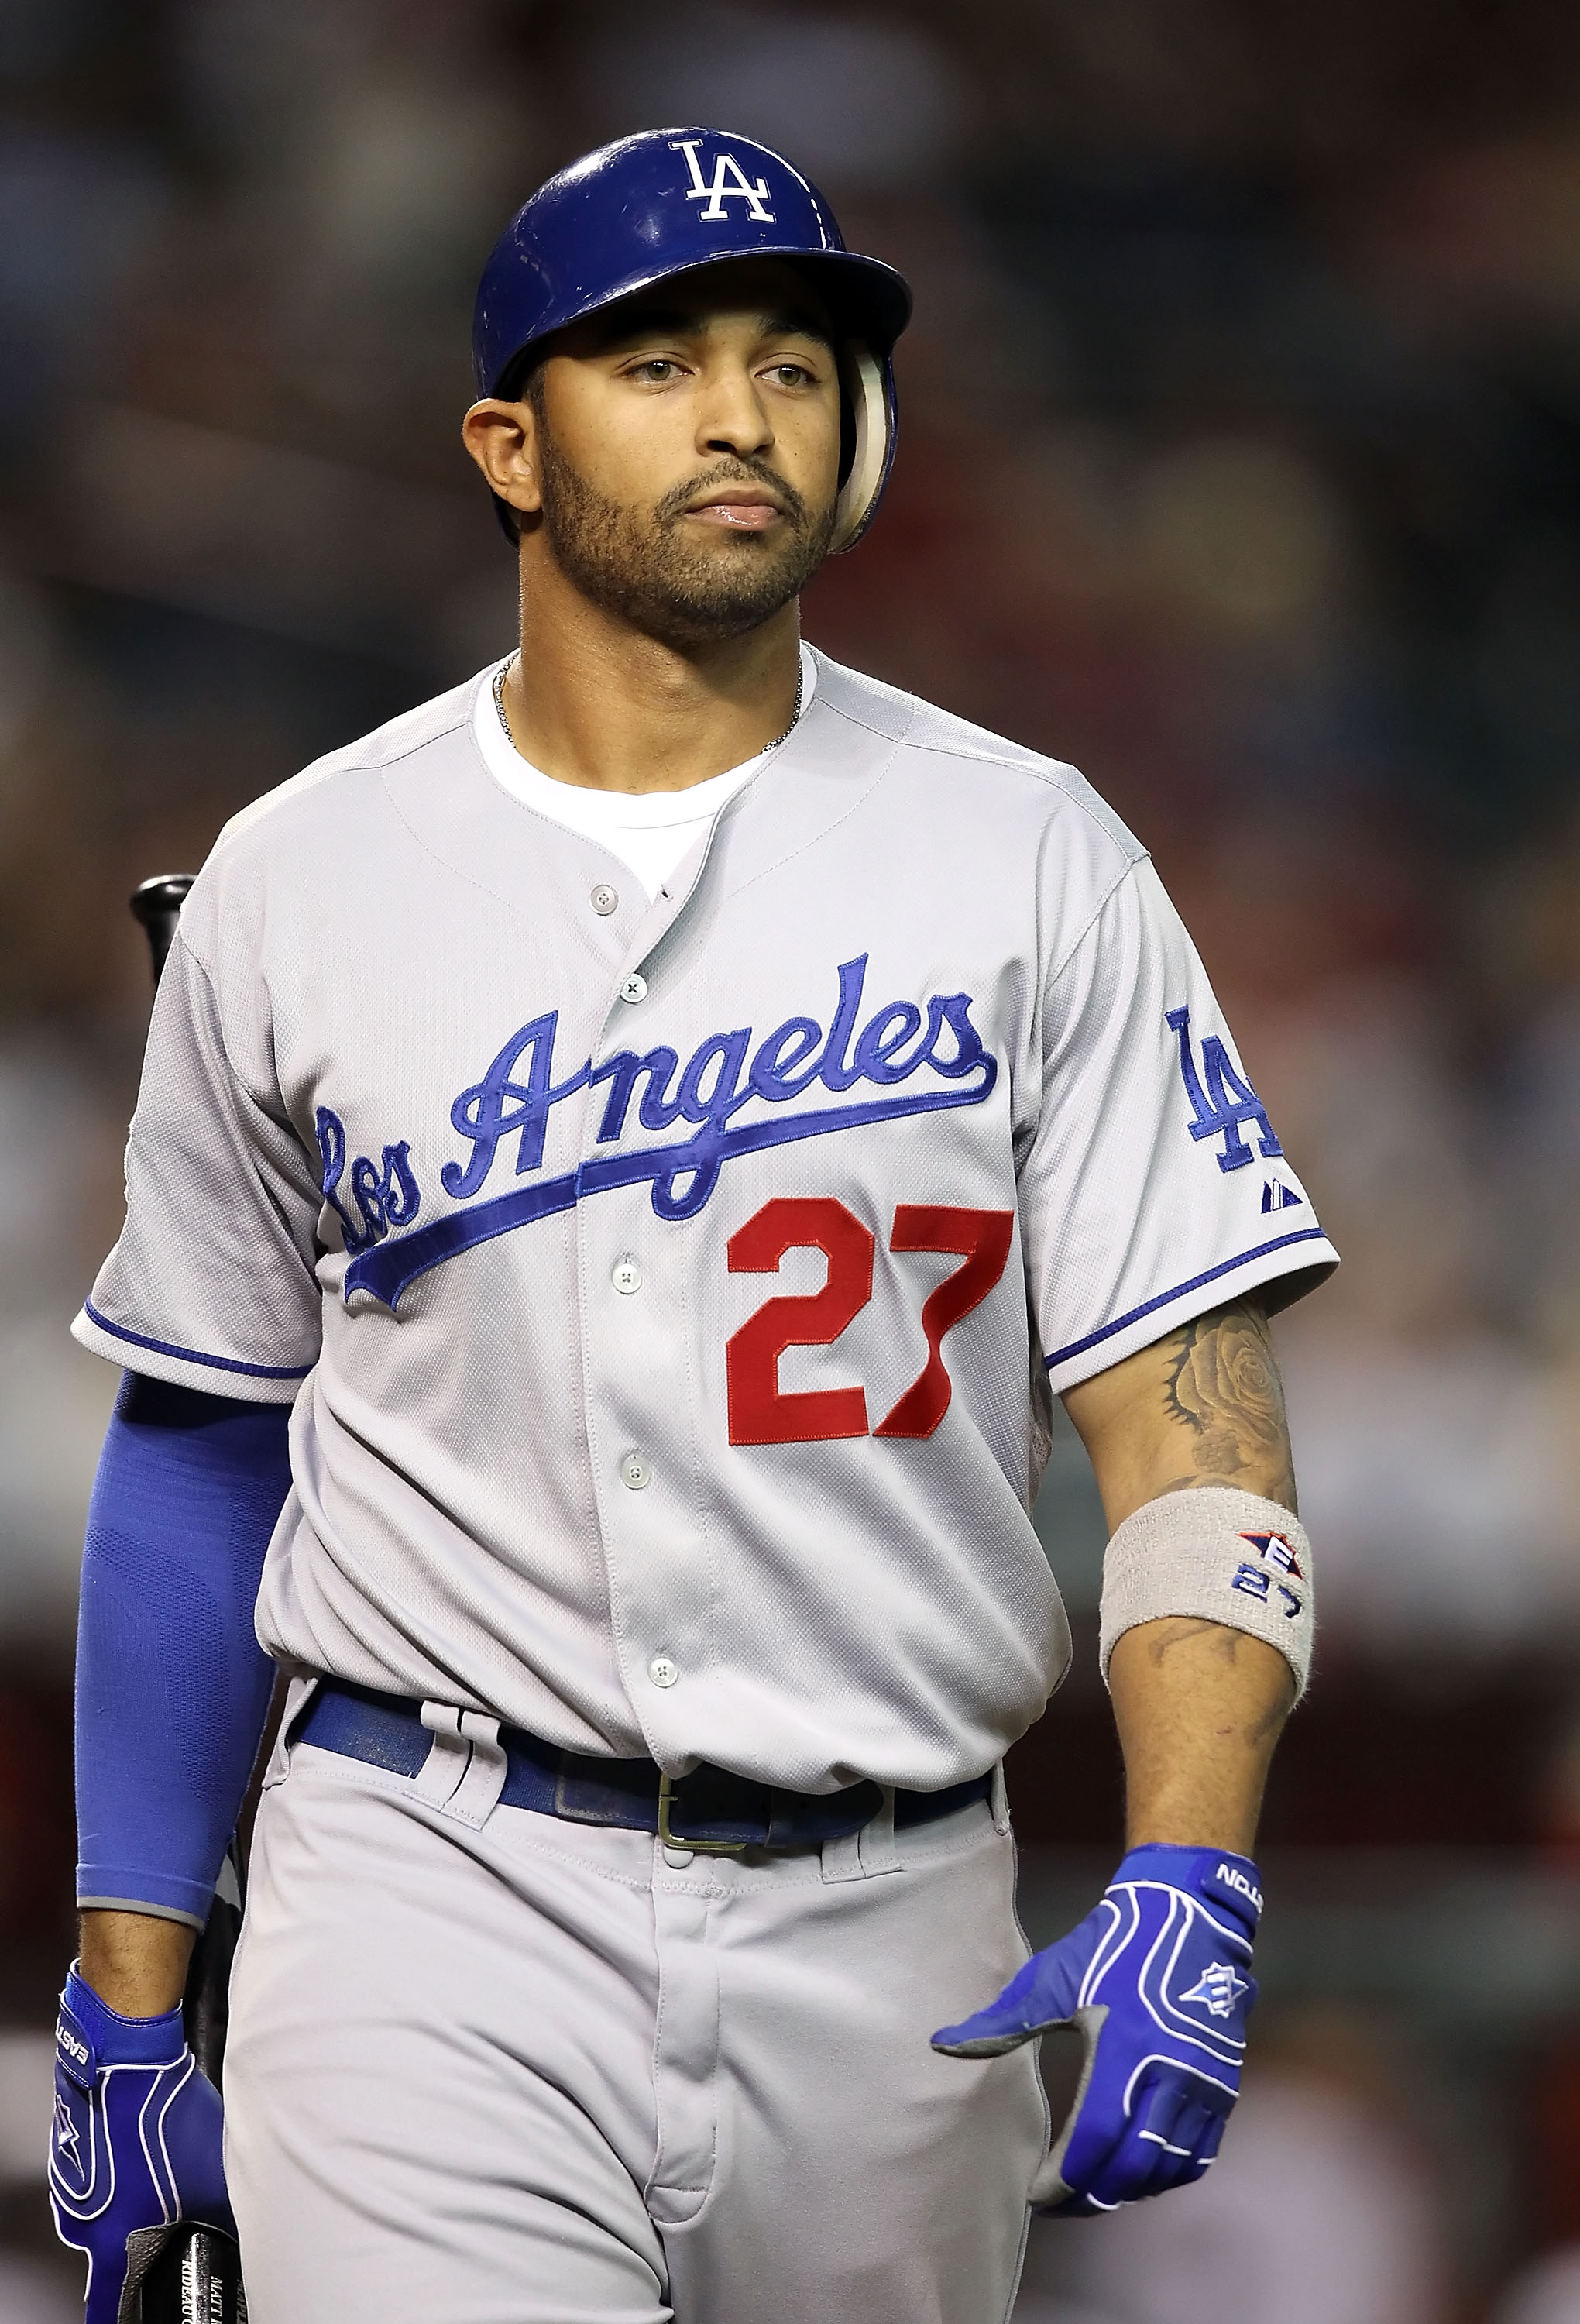 PHOENIX - SEPTEMBER 24:  Matt Kemp #27 of the Los Angeles Dodgers strikes out against the Arizona Diamondbacks during the Major League Baseball game at Chase Field on September 24, 2010 in Phoenix, Arizona.  (Photo by Christian Petersen/Getty Images)